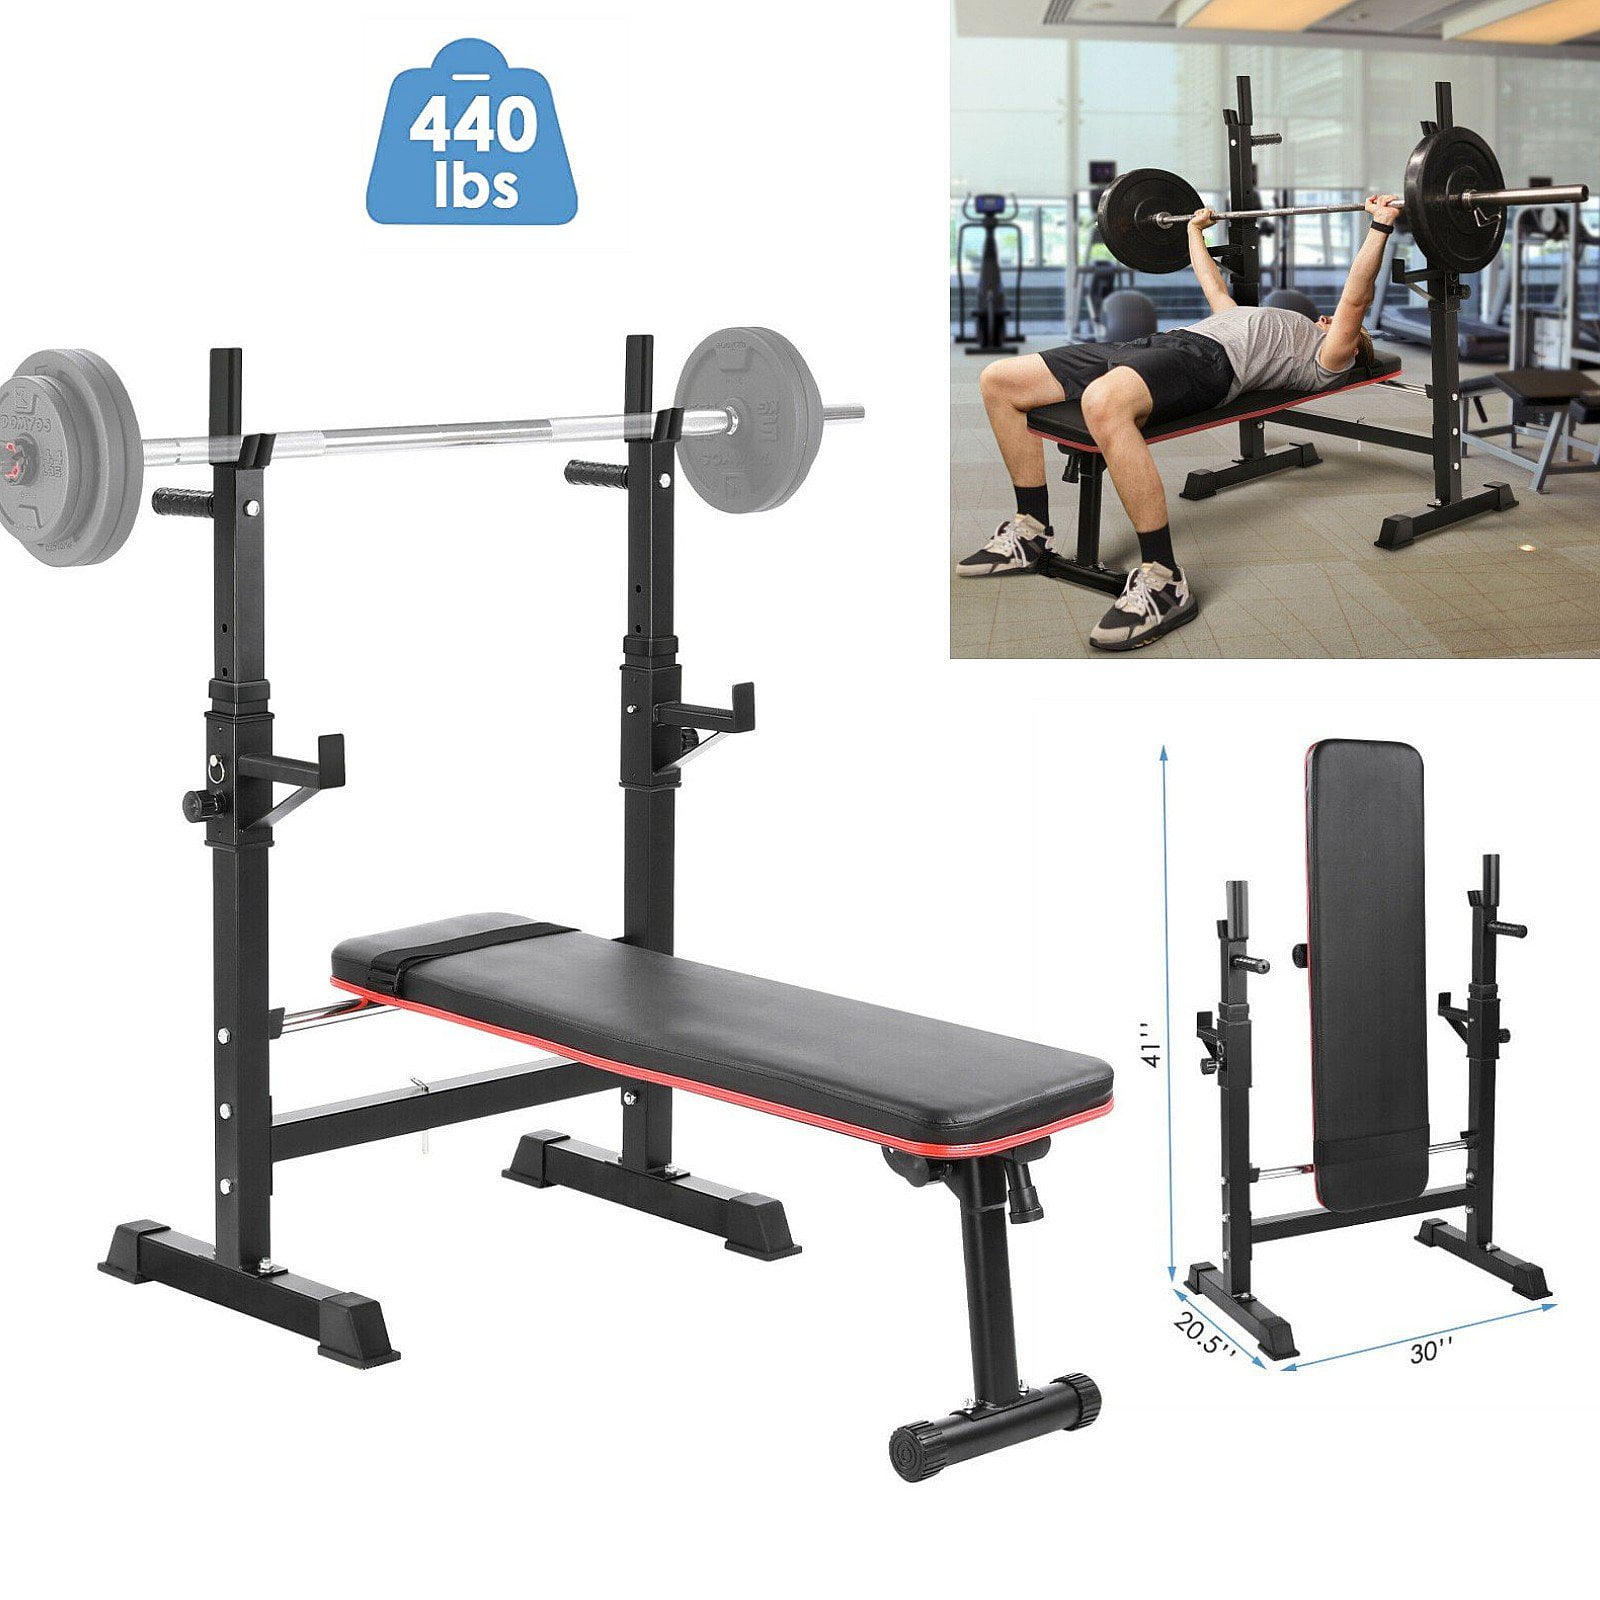 Household Foldable Sports Dumbbell Bench Squat Rack Strength Training Bench for Full Body Workout Weightlifting Bed Bench Press Equipment 